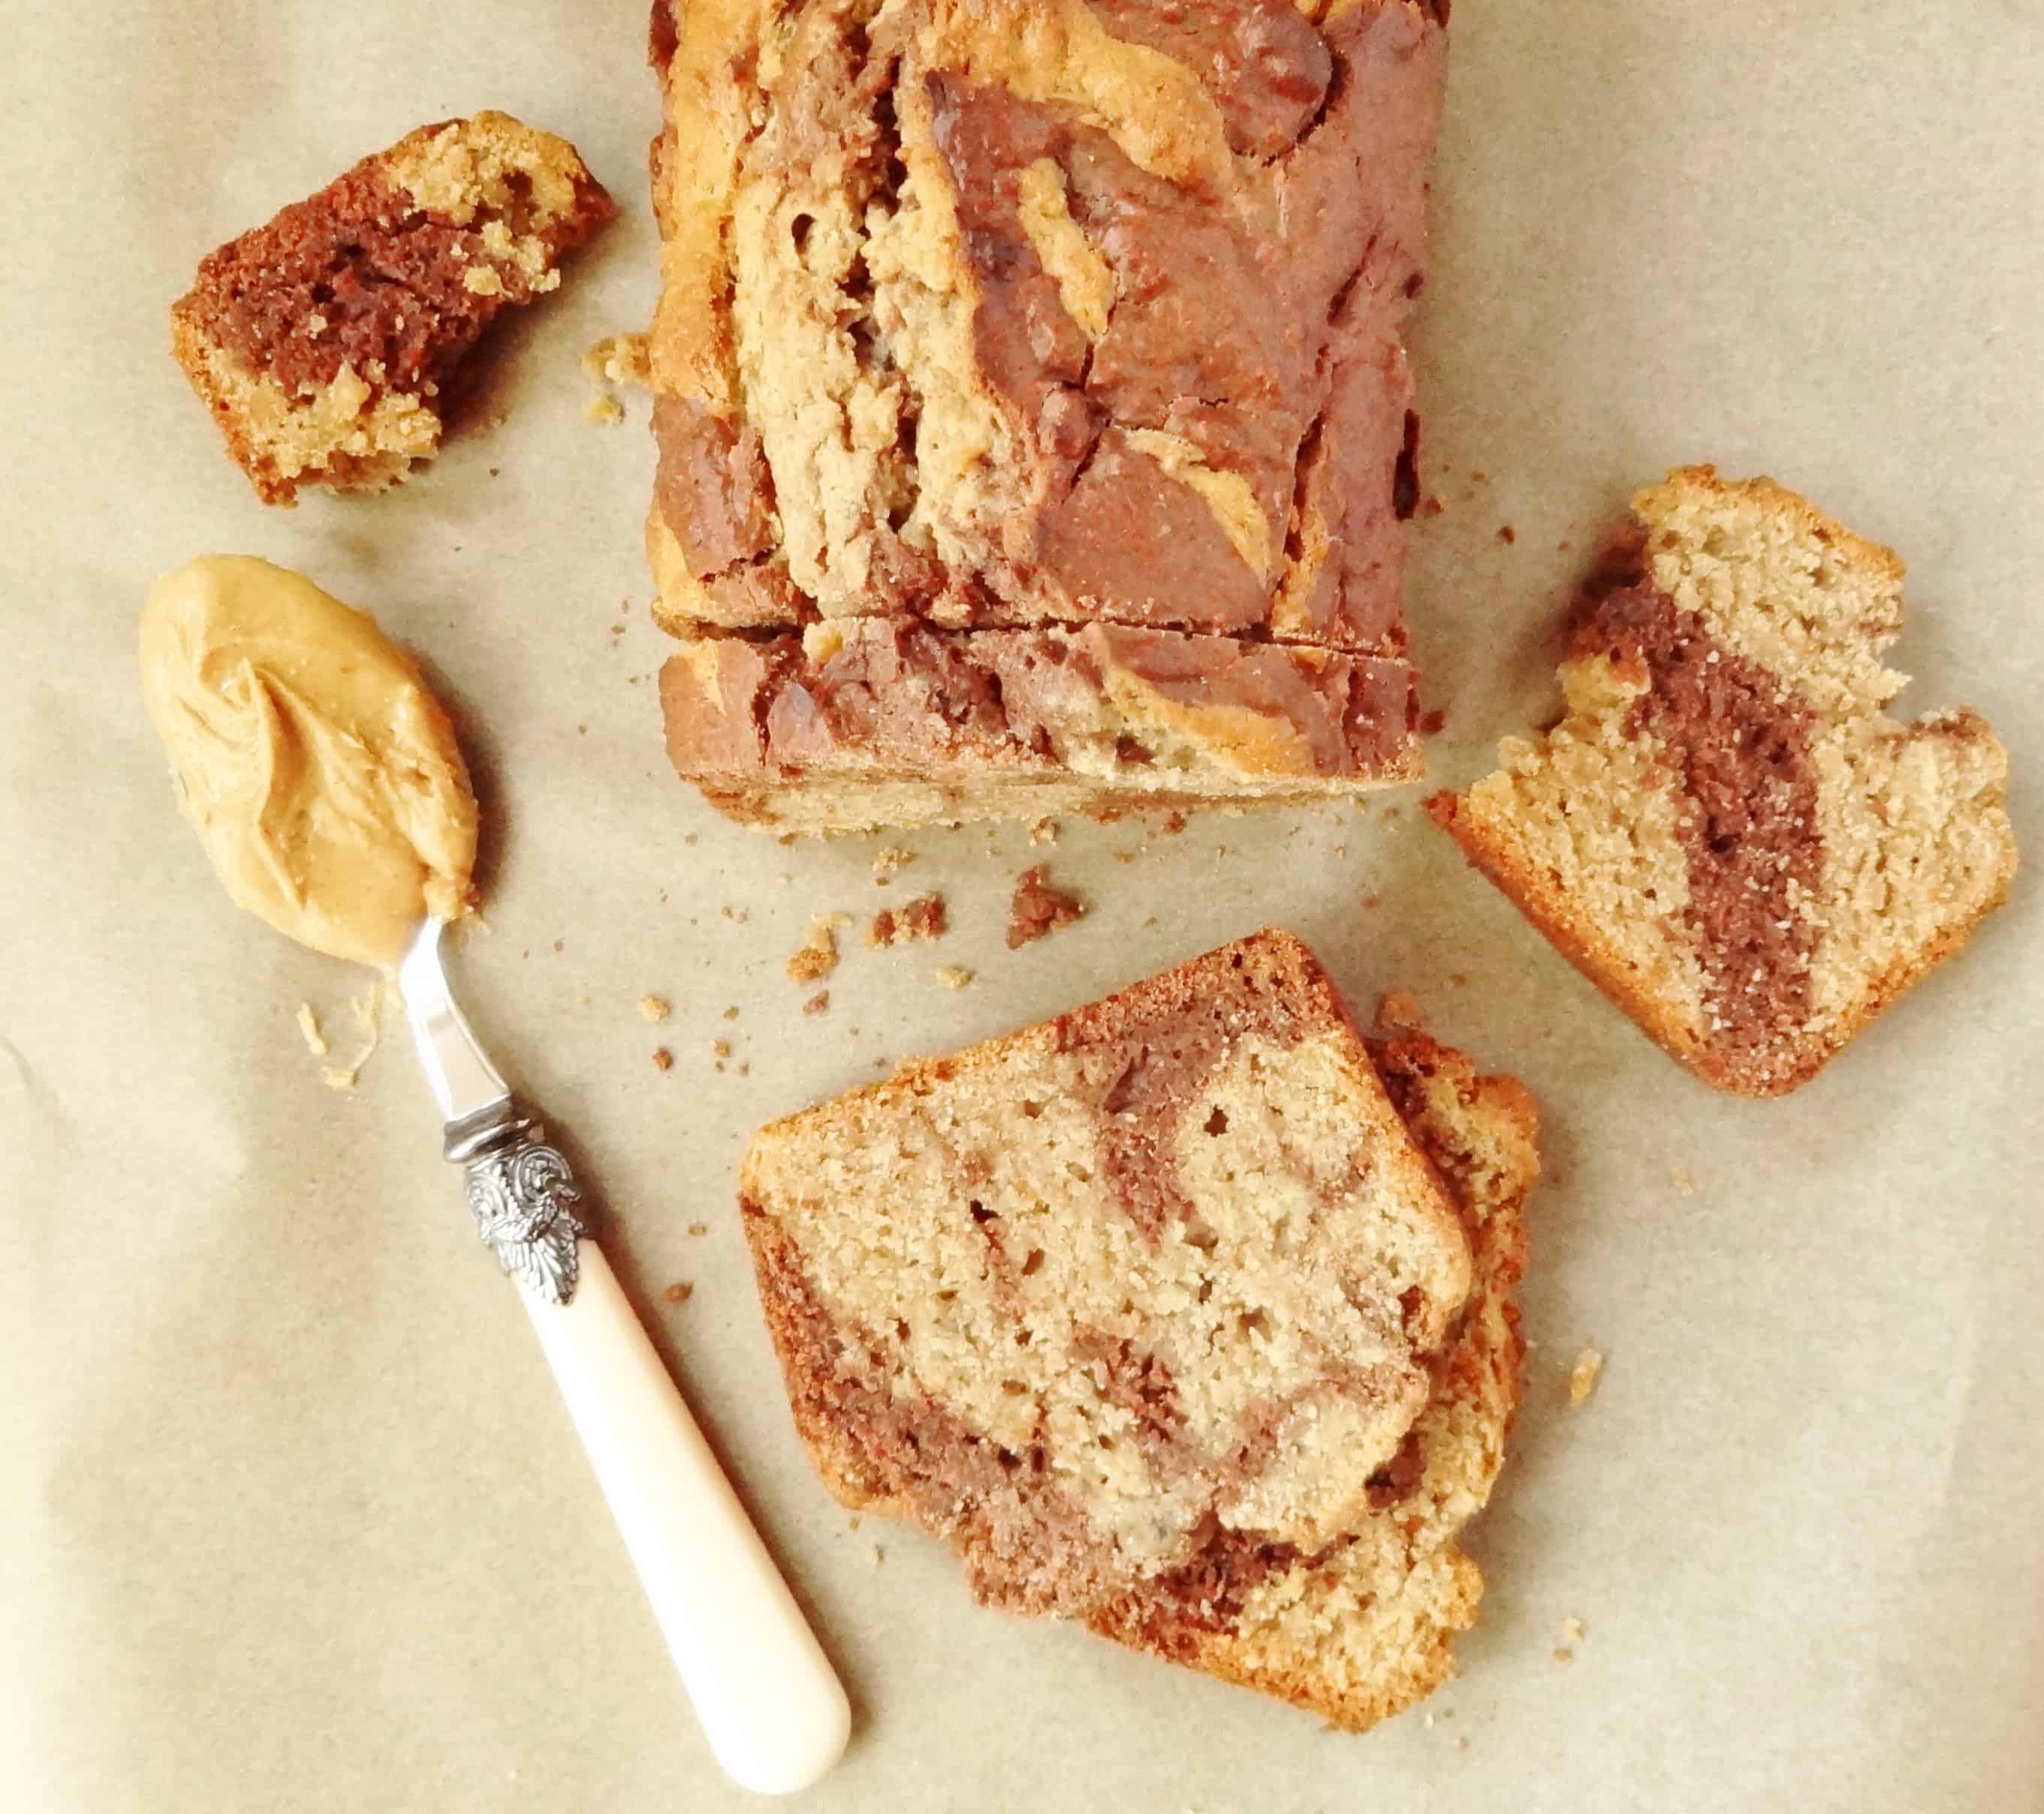 http://domesticgothess.com/wp-content/uploads/2015/01/marbled-chocolate-peanut-butter-banana-bread-Copy.jpg